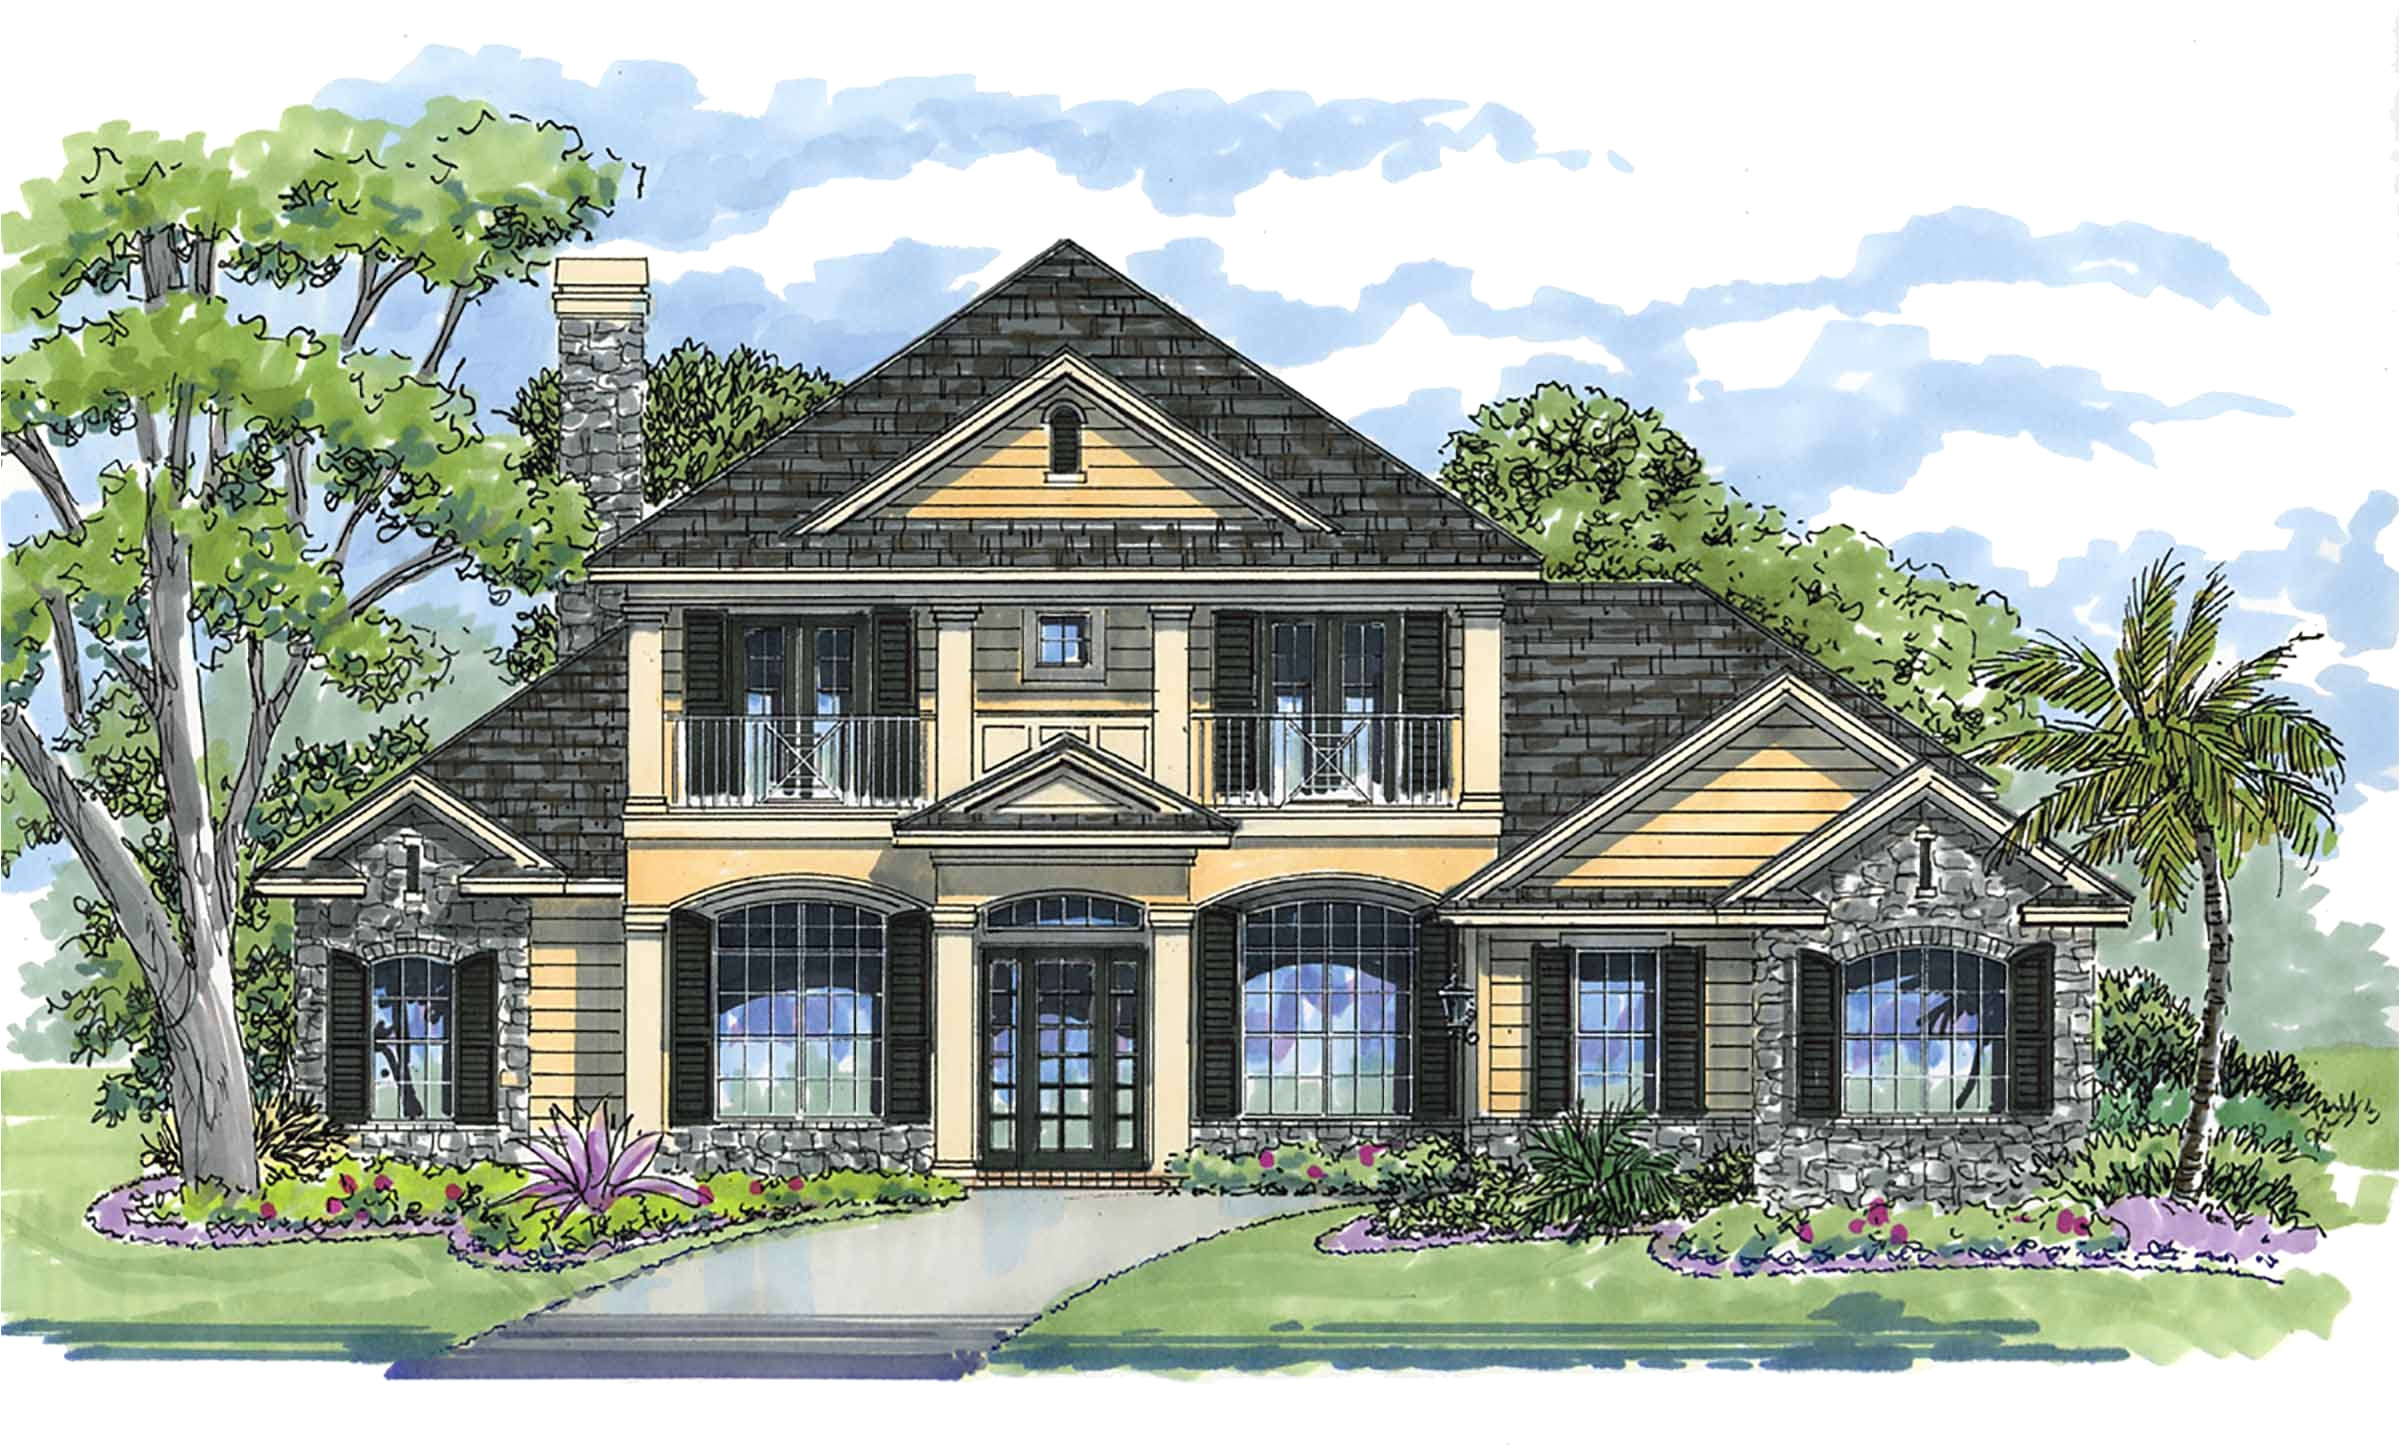 Luxury Waterfront Home Plans Luxury Waterfront Home Plans Homes Floor Plans